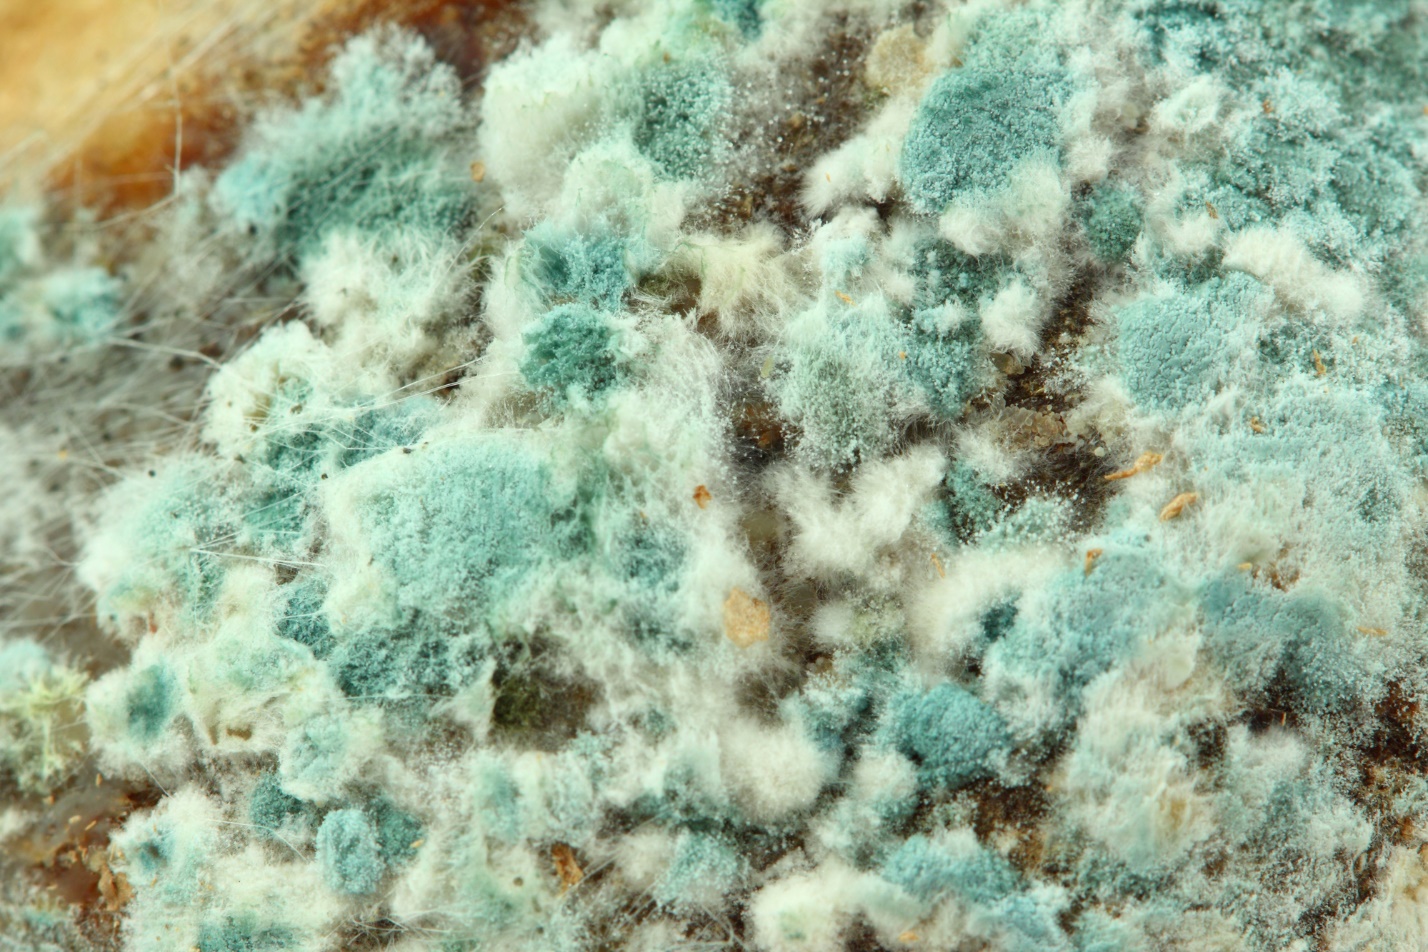 How to Know if you Have Mold Issues